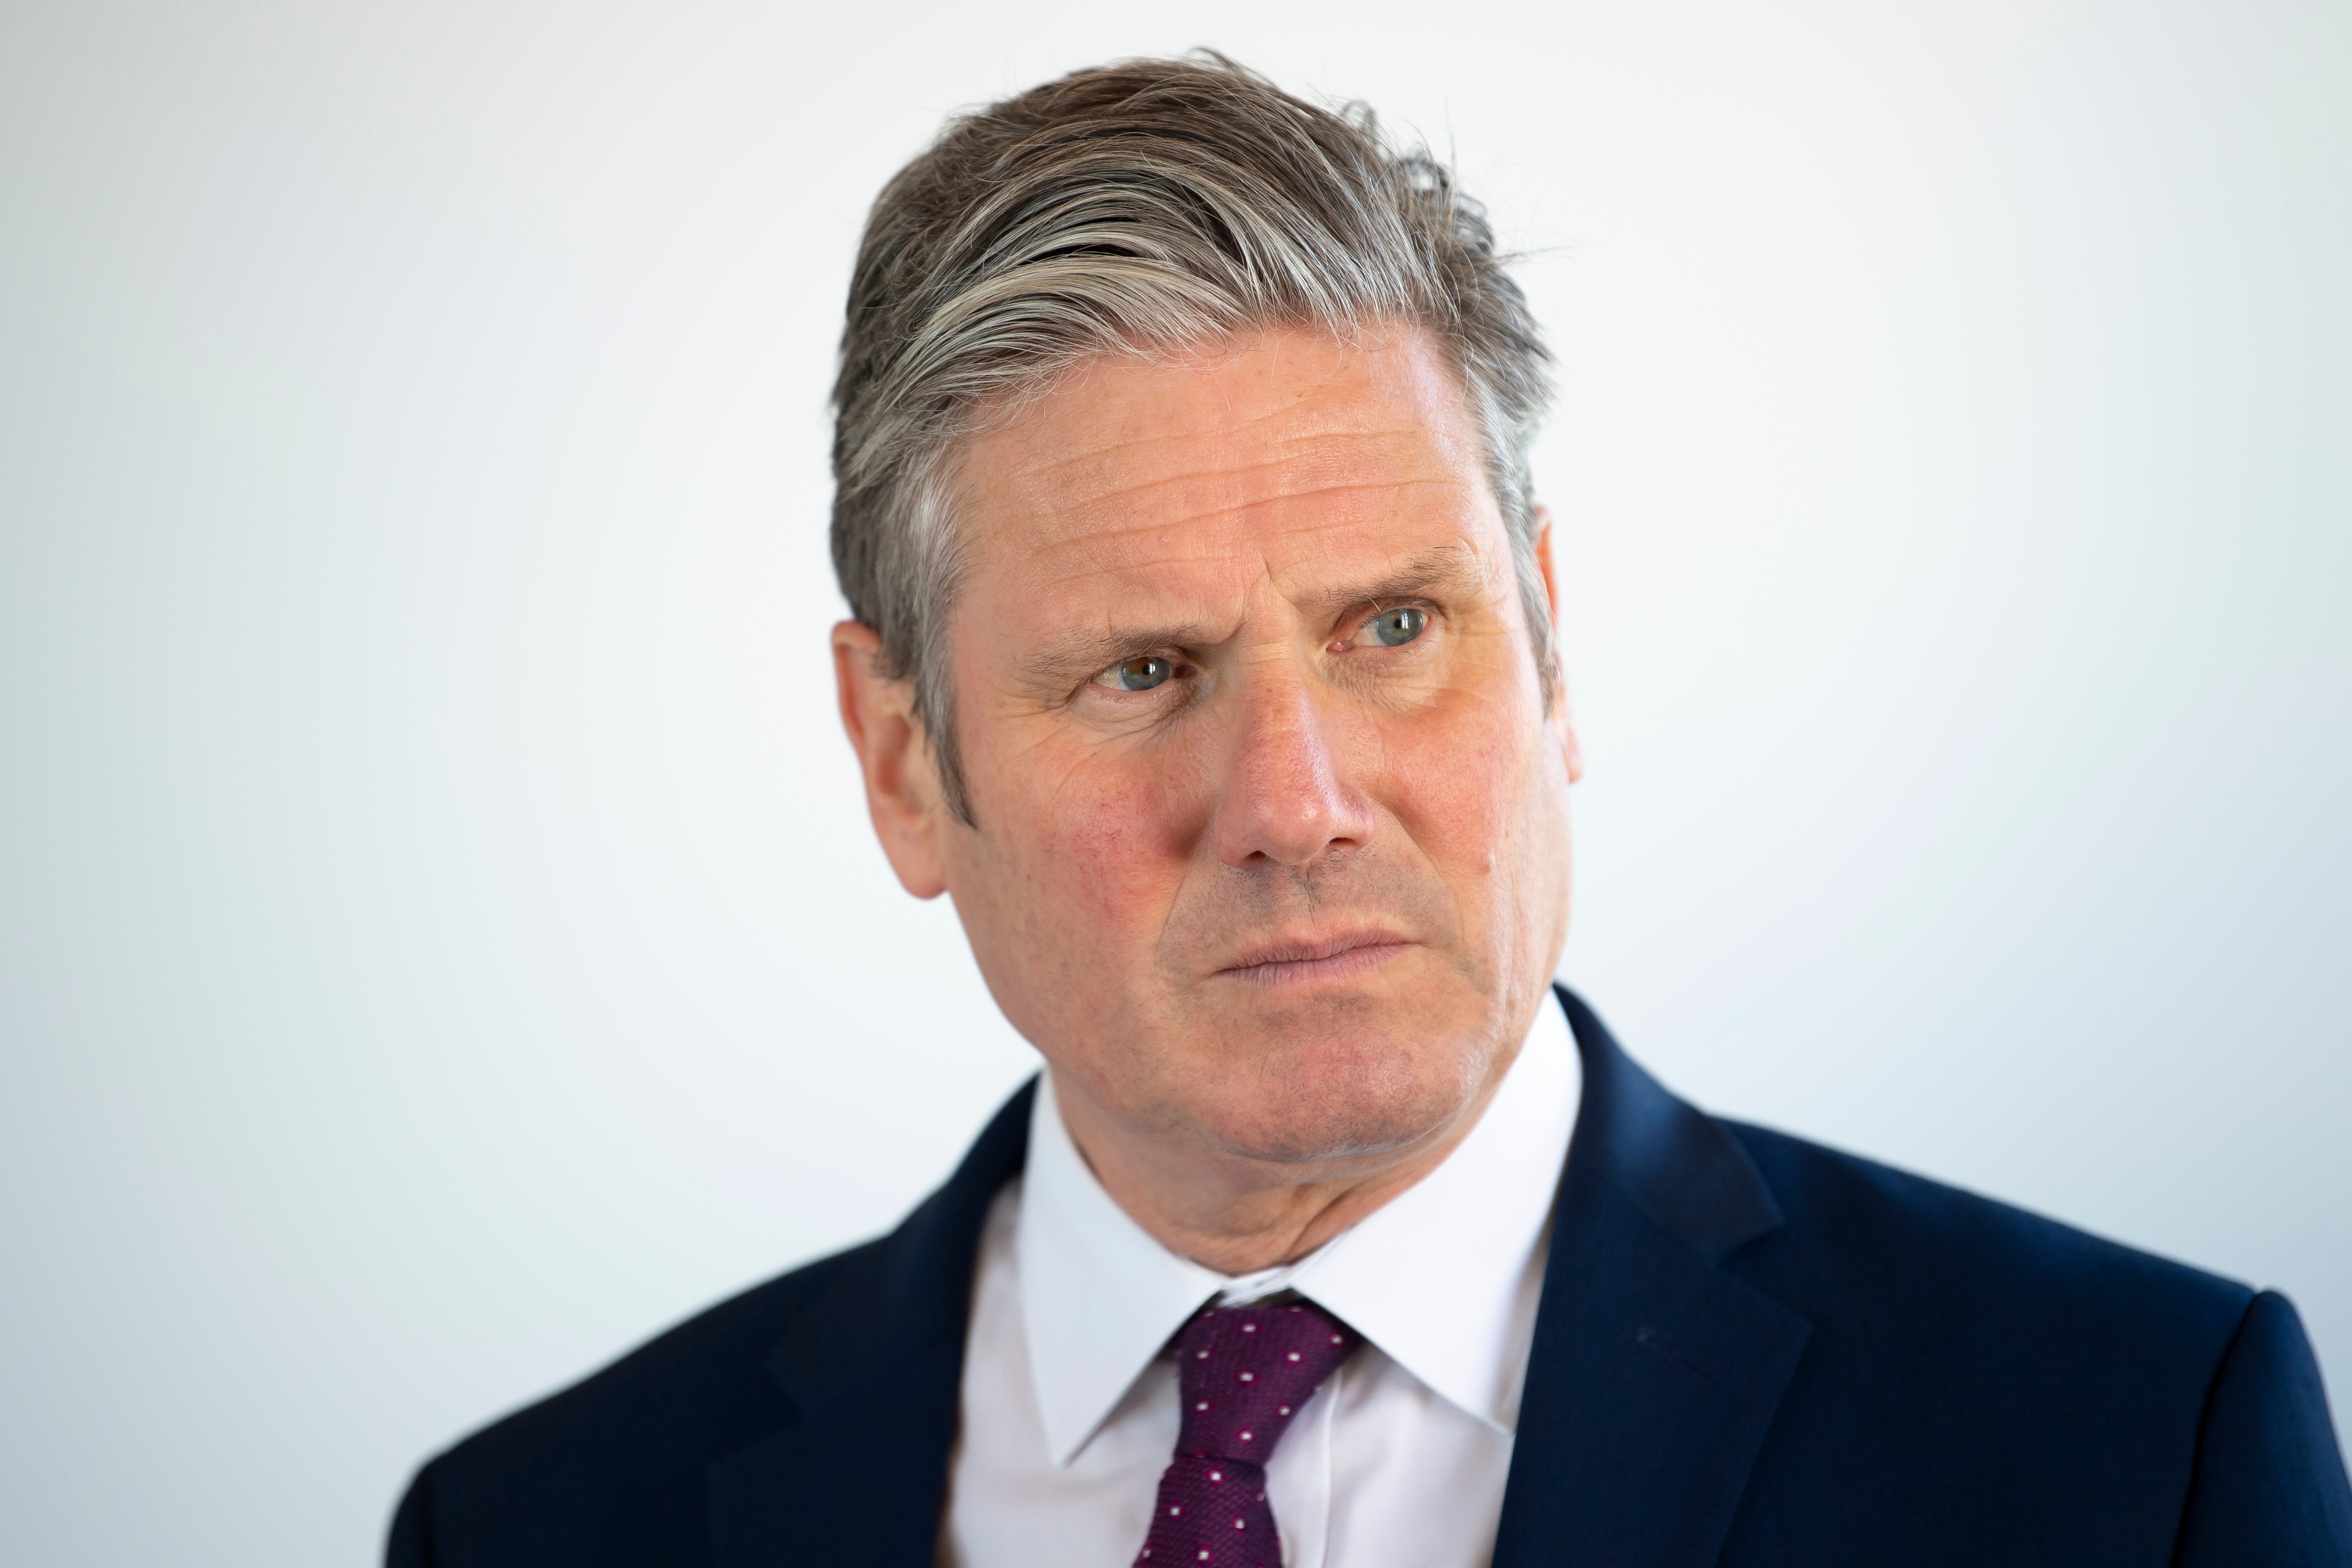 Labour leader Keir Starmer also criticised the prime minister for ‘misselling’ his Brexit deal